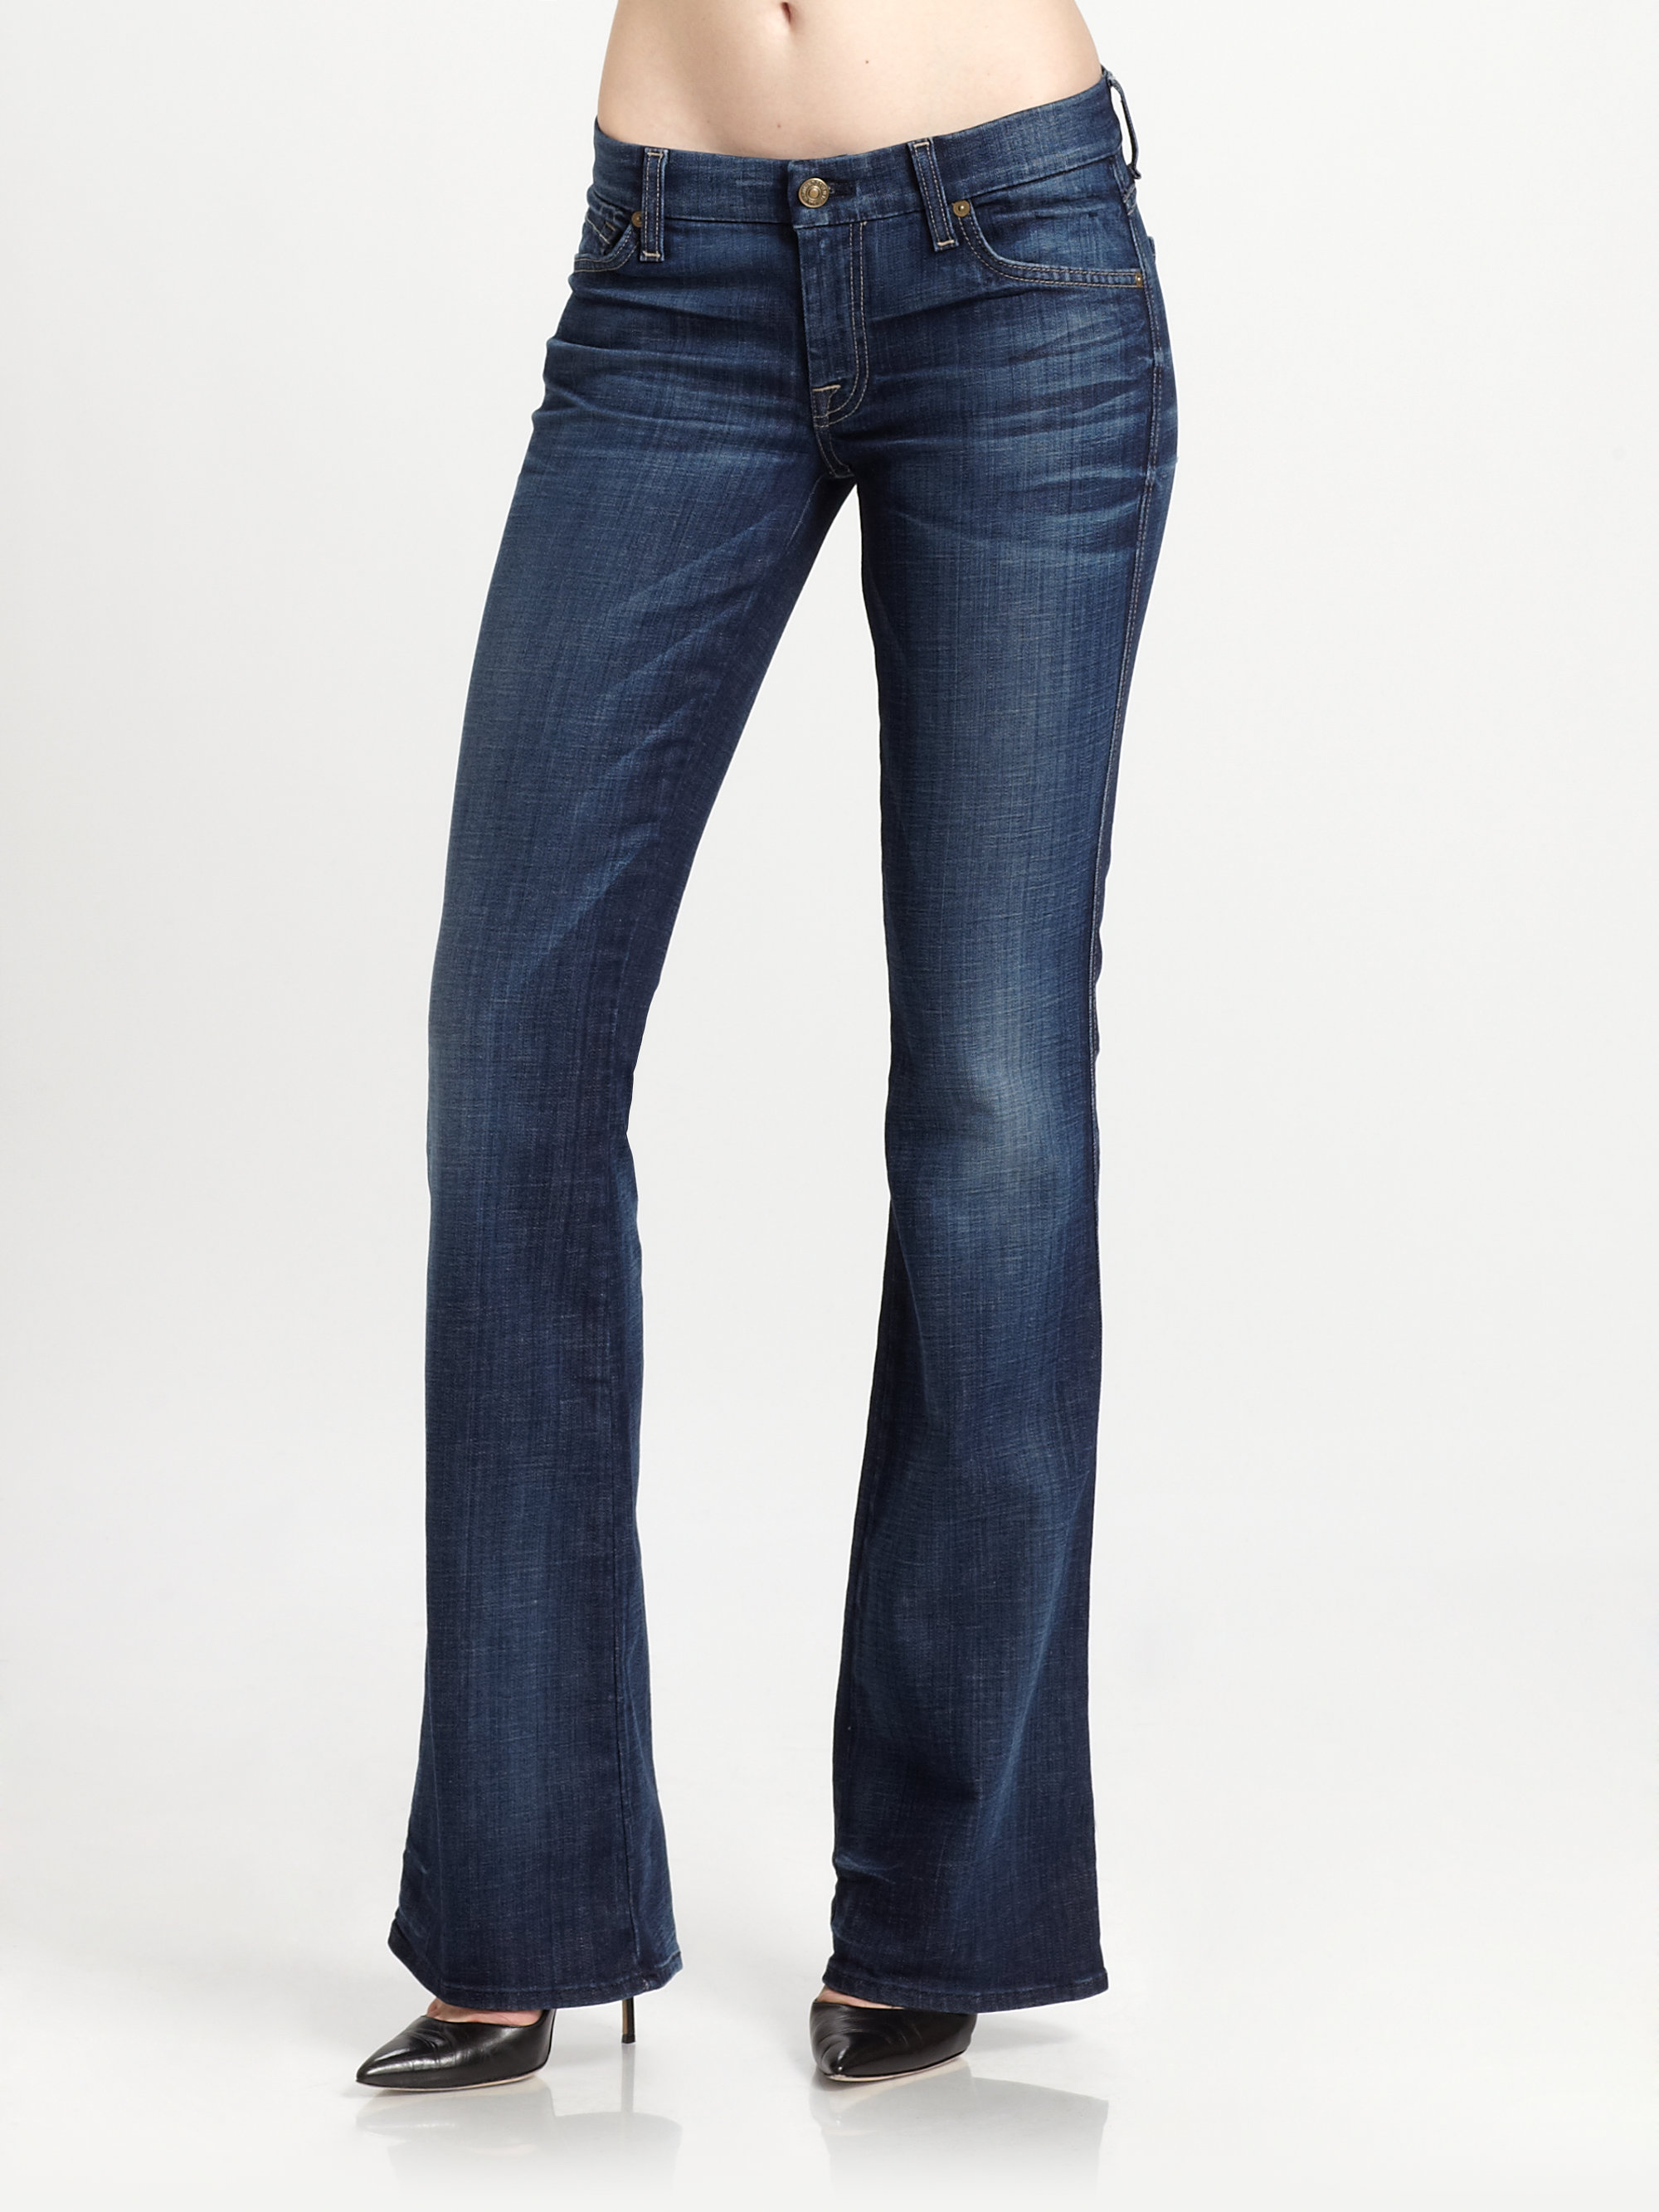 7 For All Mankind A-pocket Bootcut Jeans in Blue - Lyst